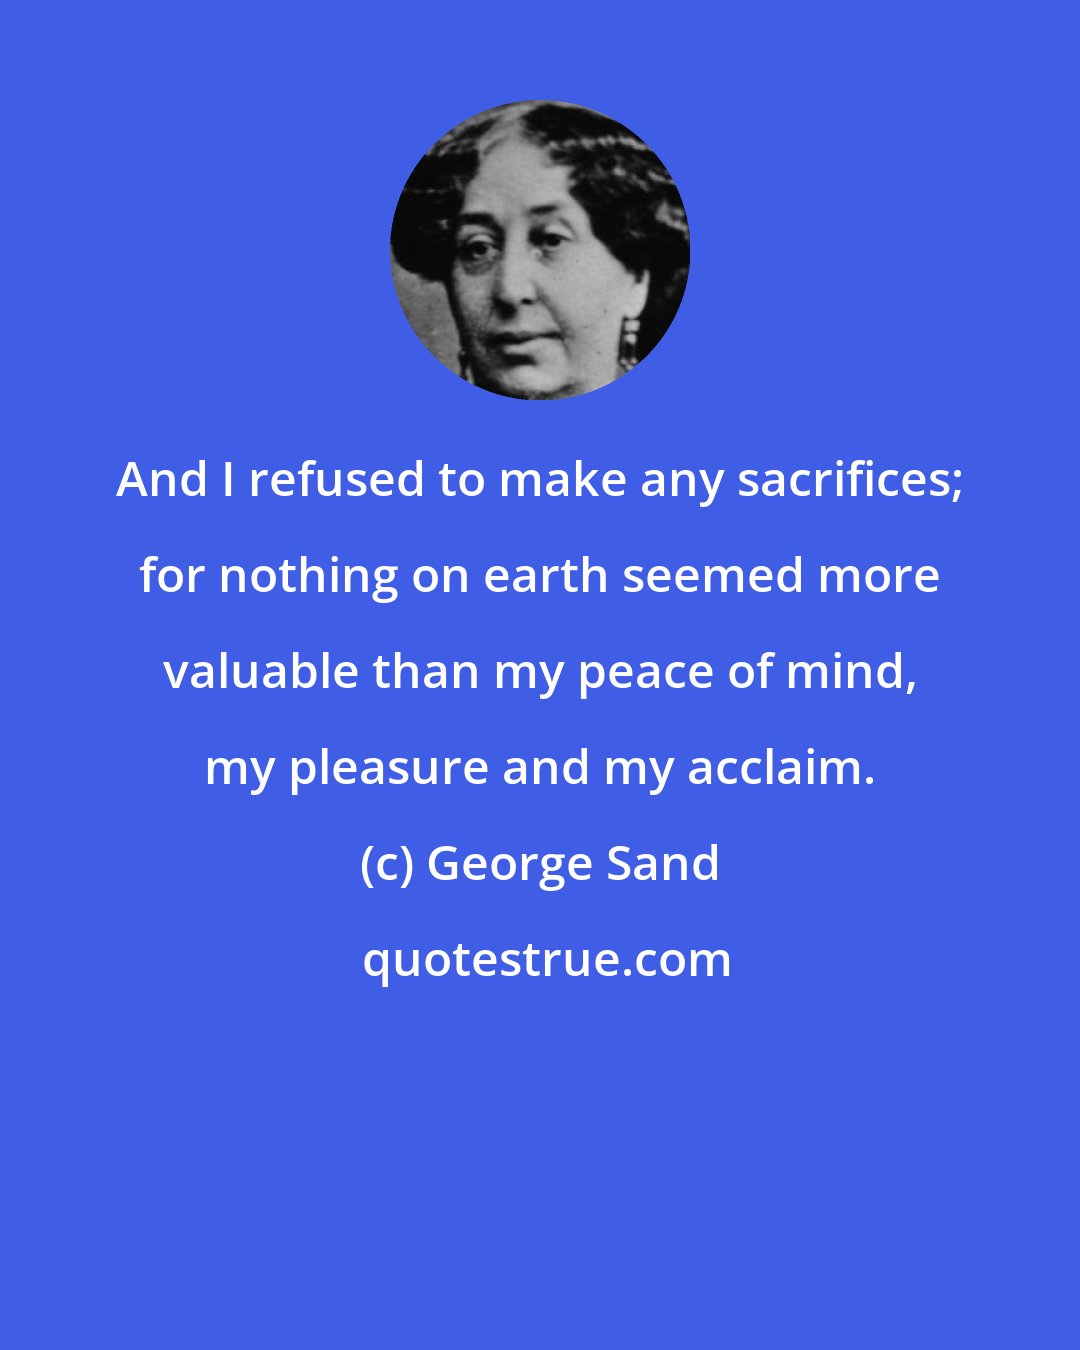 George Sand: And I refused to make any sacrifices; for nothing on earth seemed more valuable than my peace of mind, my pleasure and my acclaim.